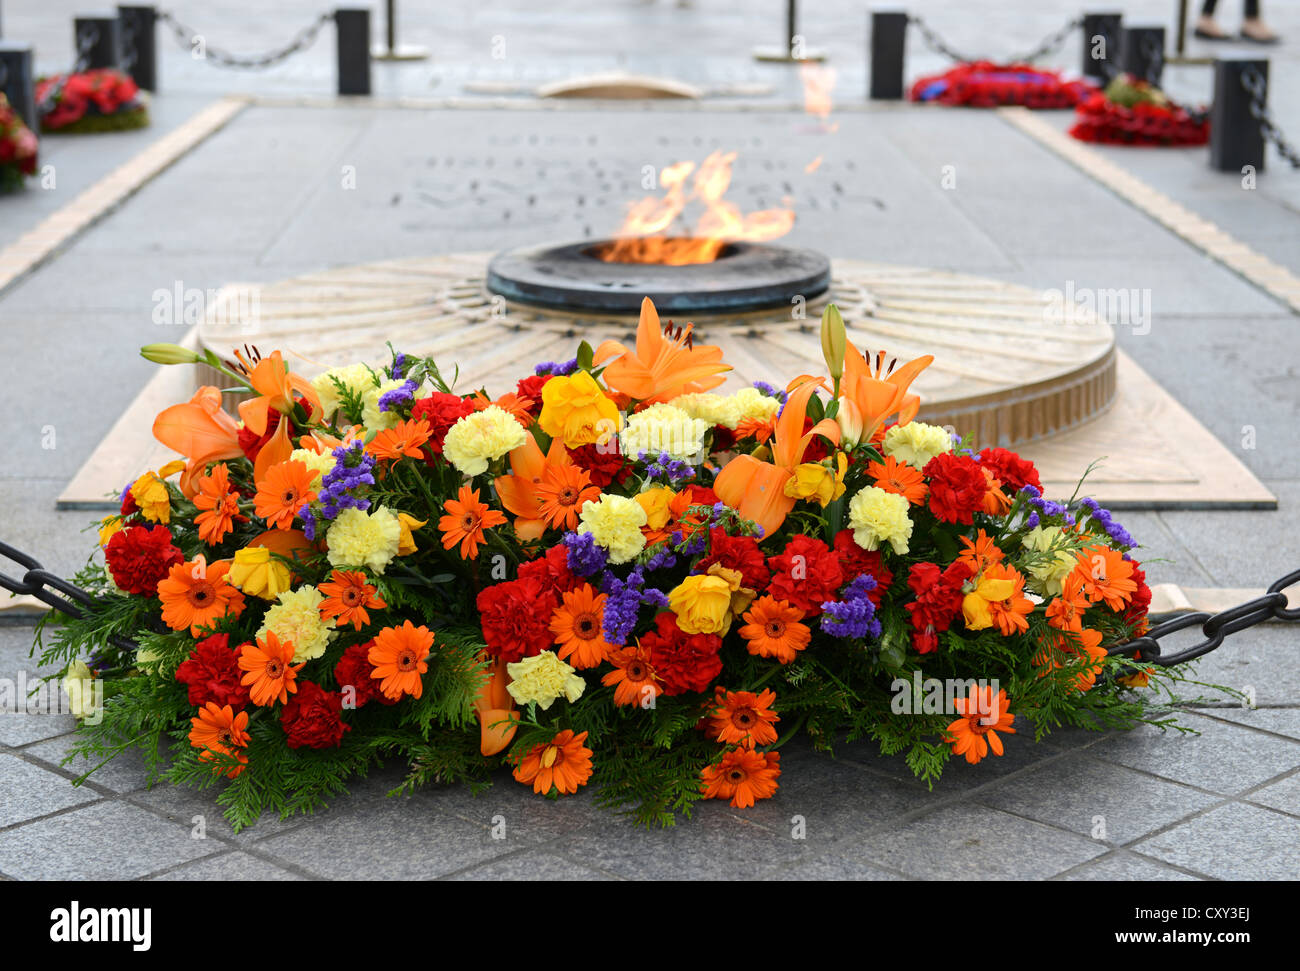 Tomb of the 'Unknown Soldier', eternal flame at the tomb of the 'unknown soldier' at the 'Arc de Triumph' in Paris, France Stock Photo